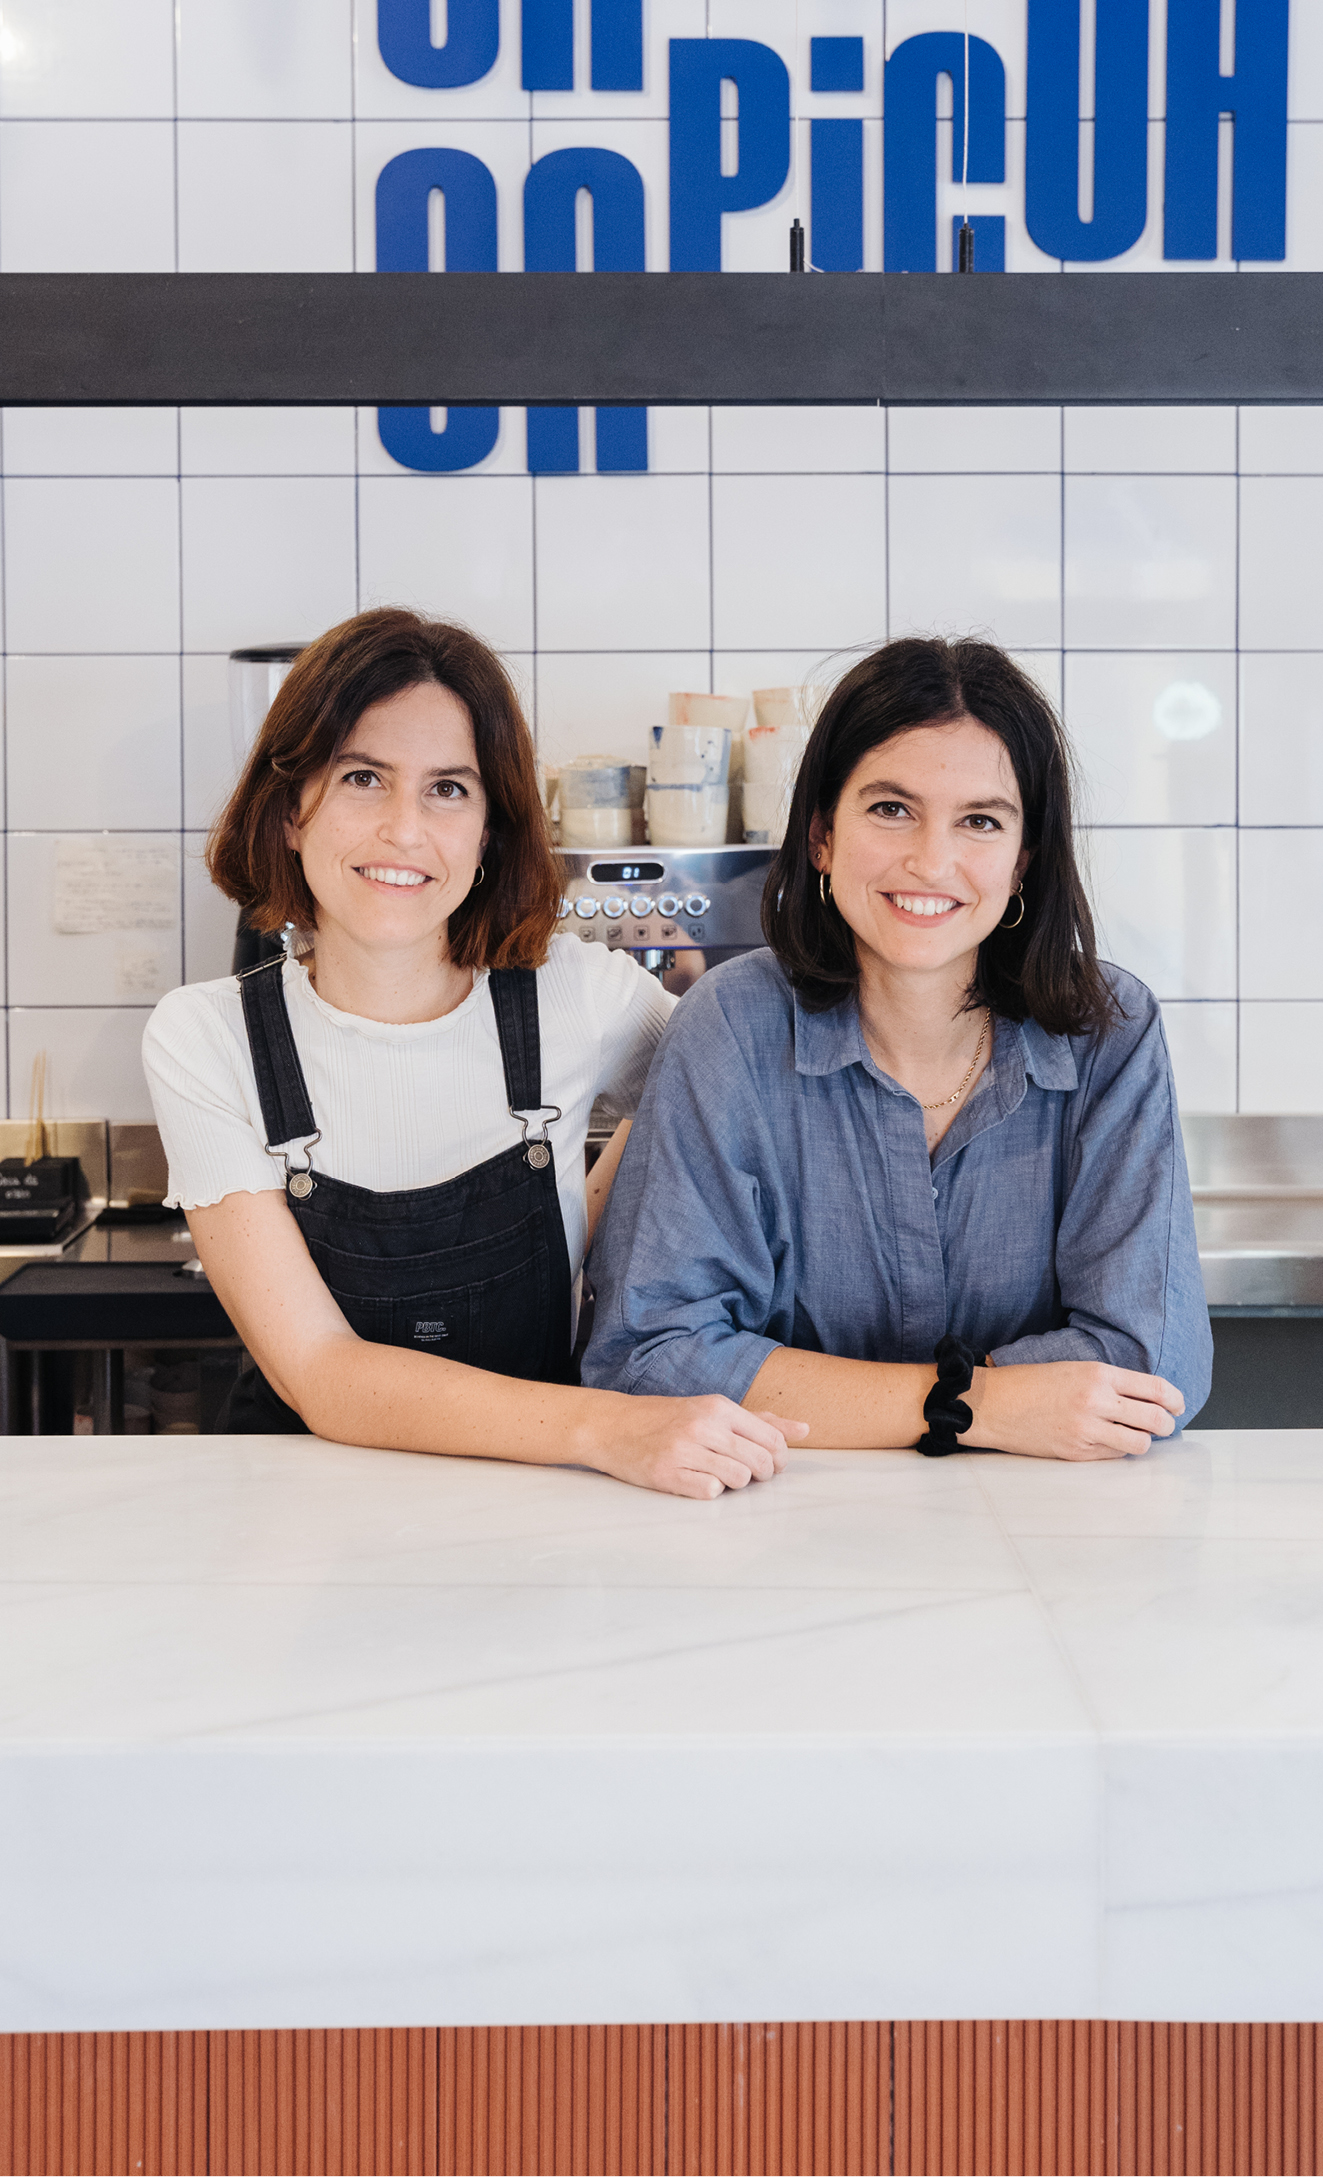 CAPICÚA, twins, law graduates, and owners of a successful catering business